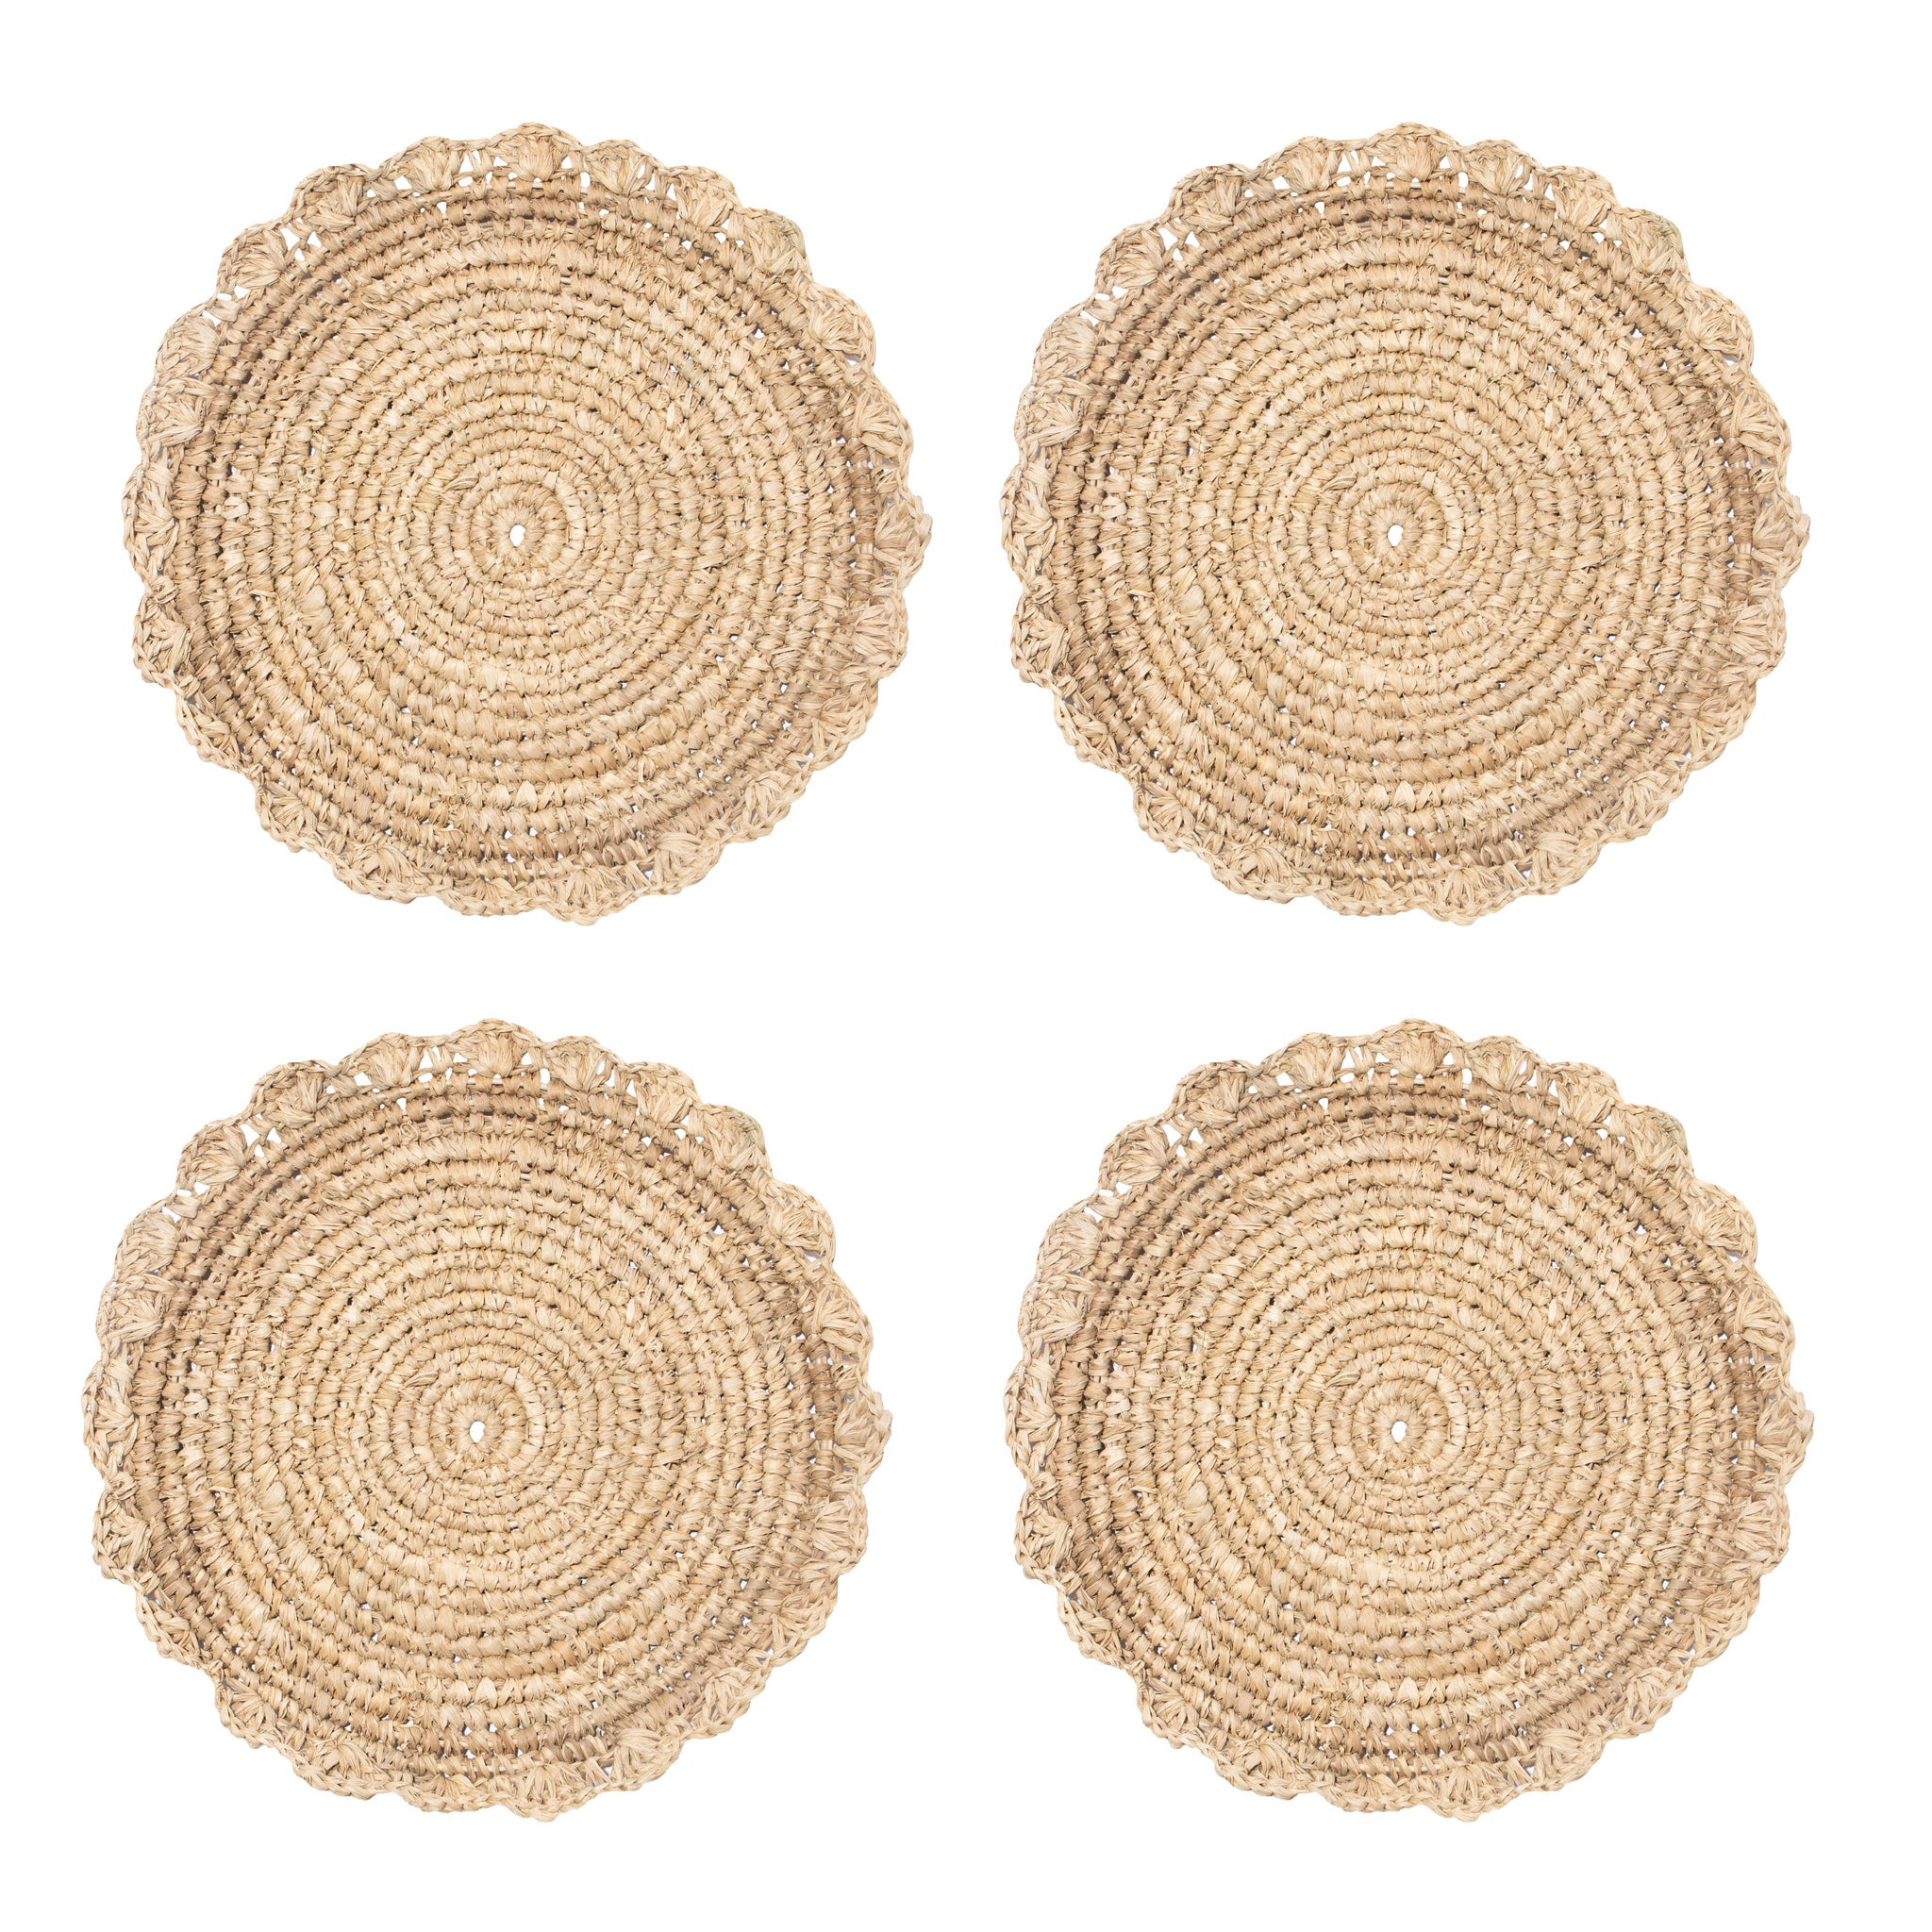 Blossom Natural Round Placemat Flower 38cm - Set of 4